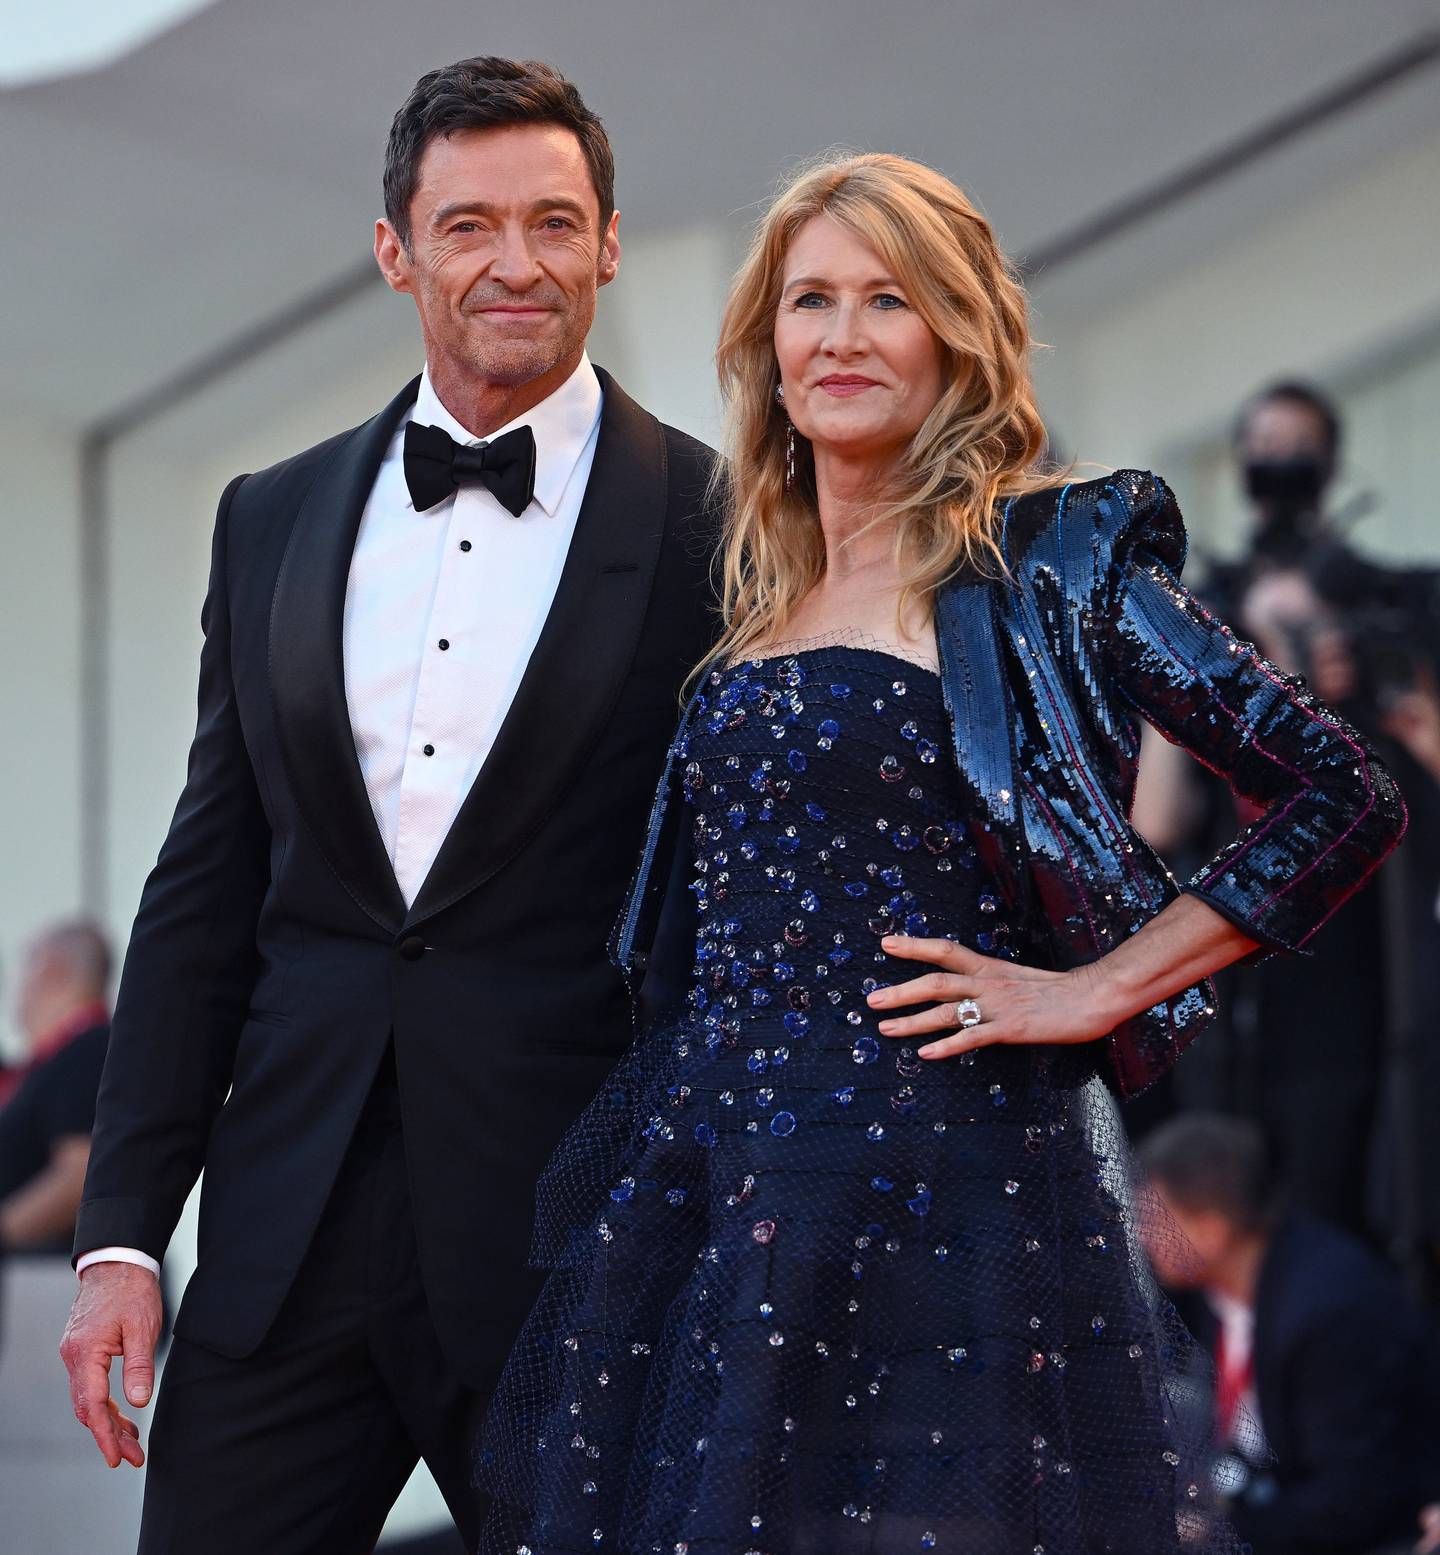 Hugh Jackman and Laura Dern attend the 'The Son' premiere. EPA